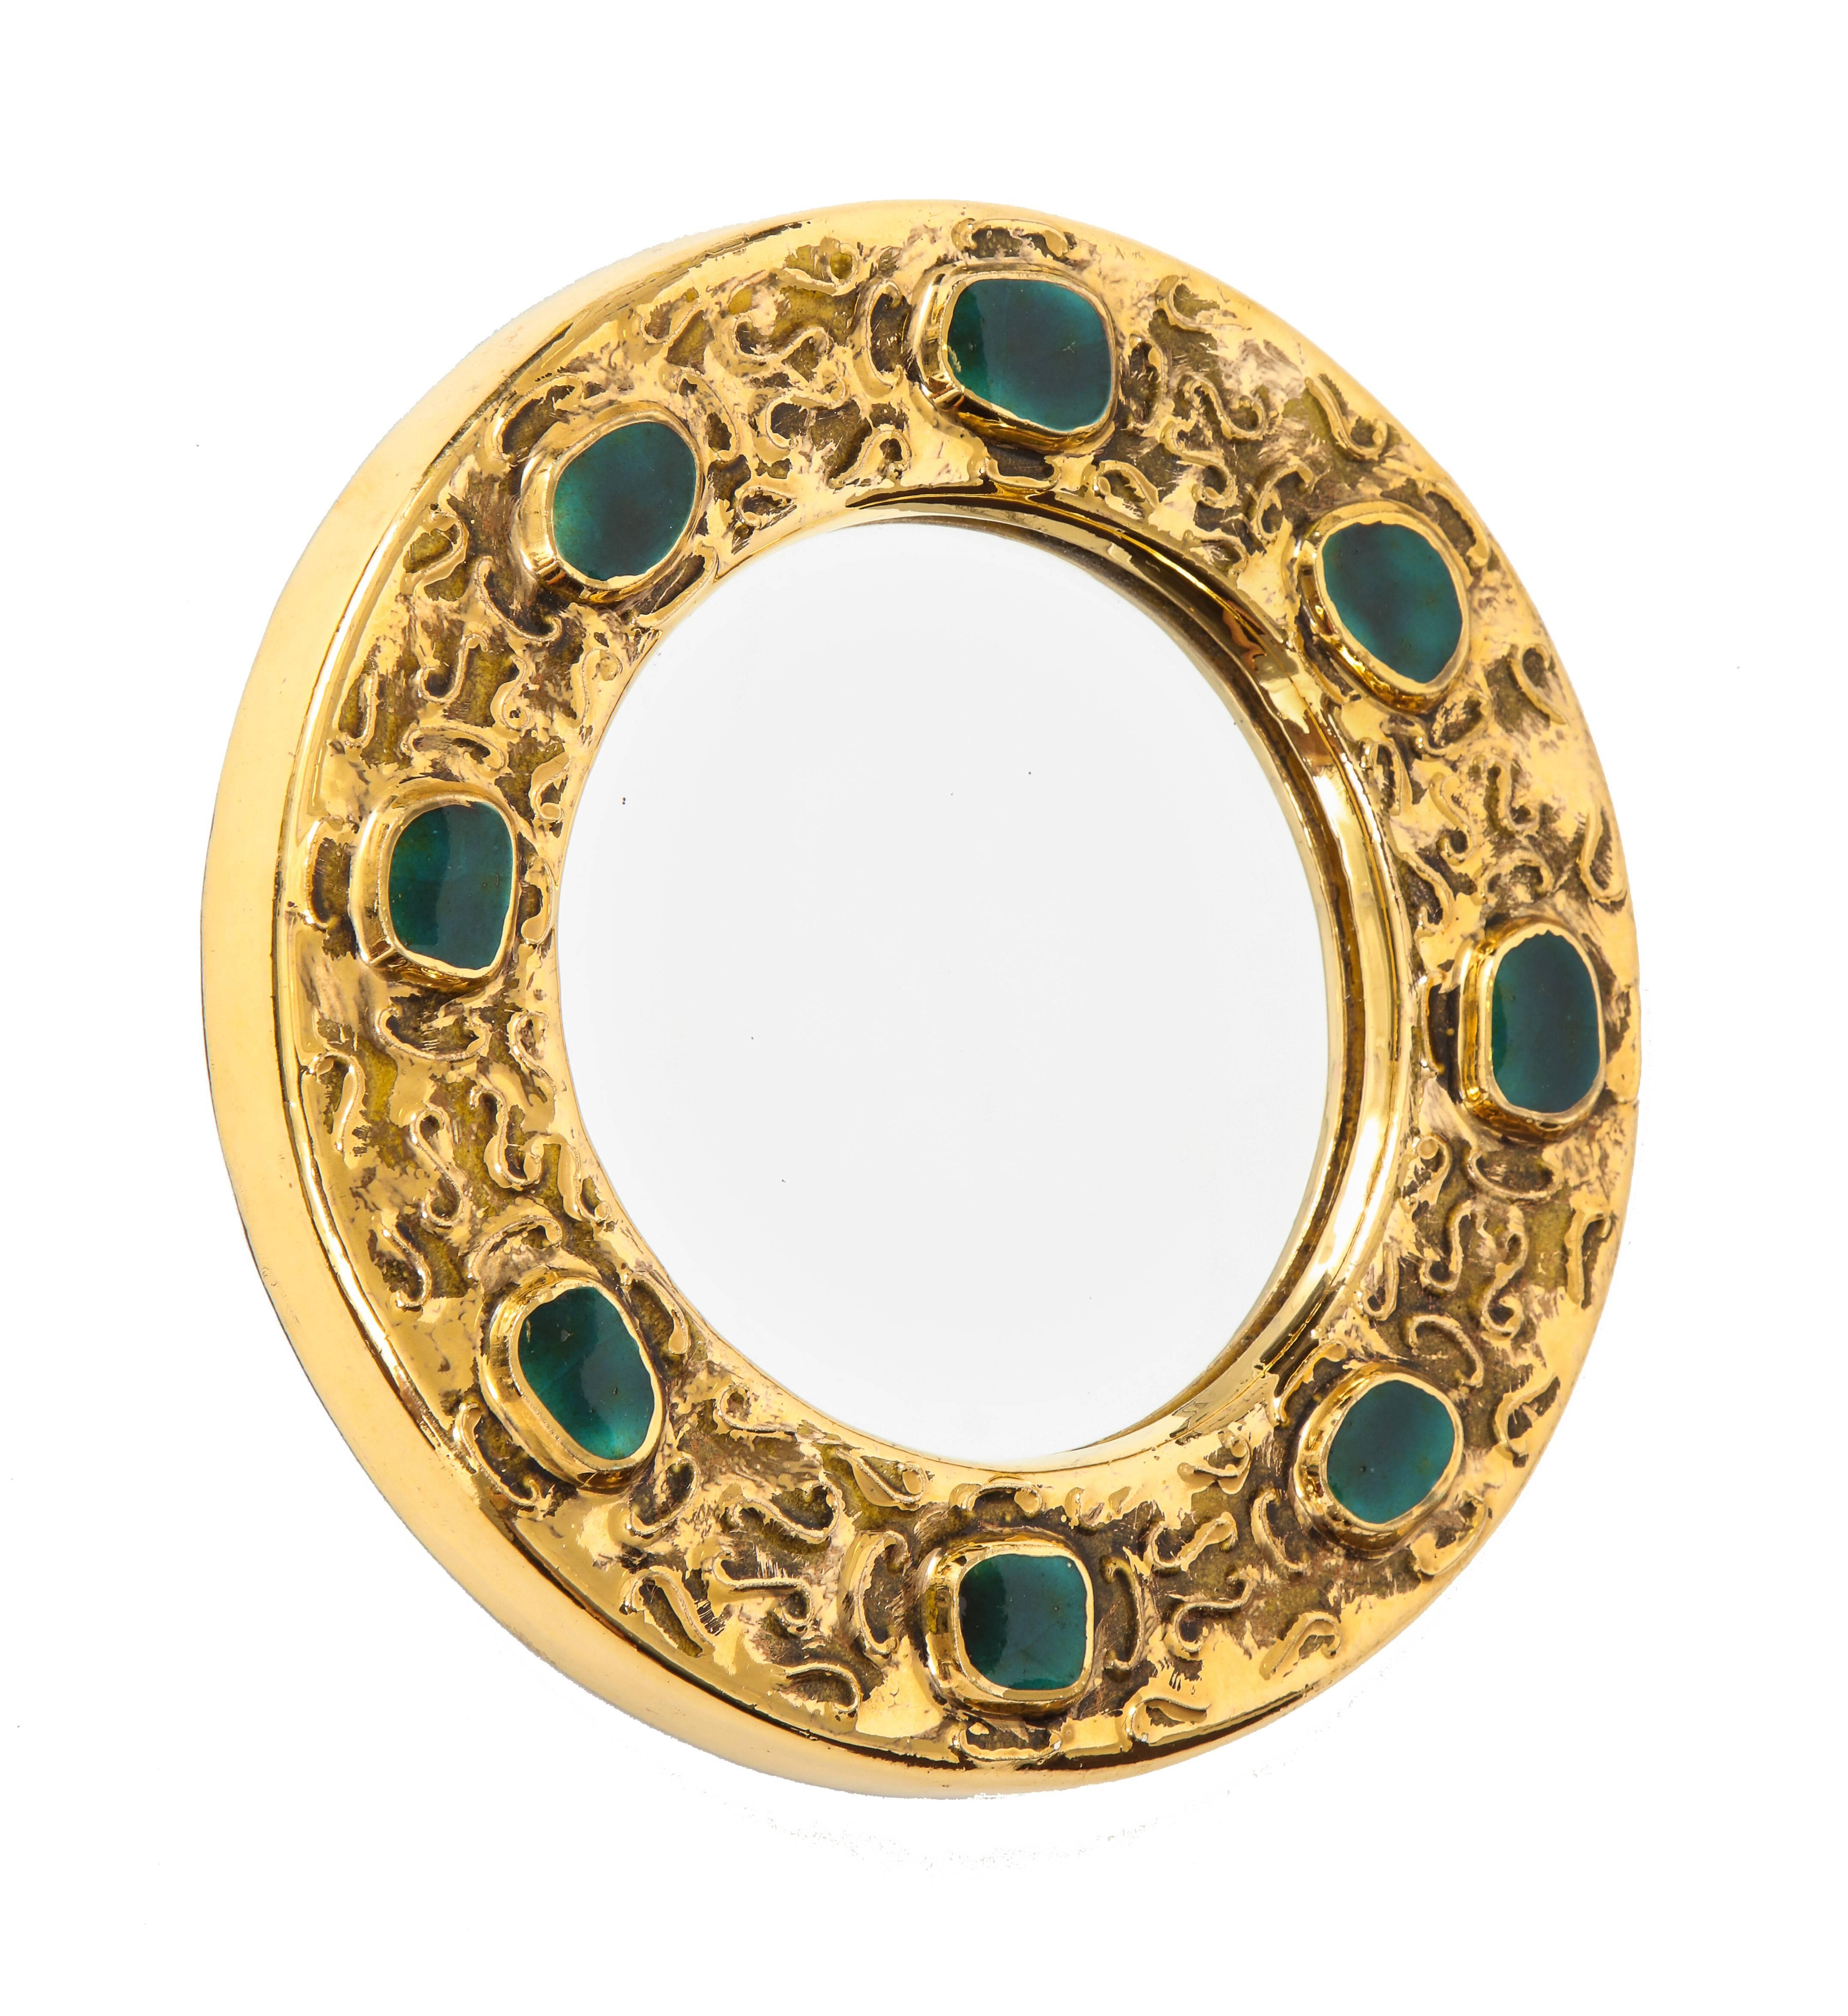 Francois Lembo mirror, ceramic, jeweled, gold and green, signed. Small scale round ceramic mirror with gold glaze decorated with emerald green jewel pattern decoration. Signed F. Lembo on verso.
A native of Vallauris François Lembo started his